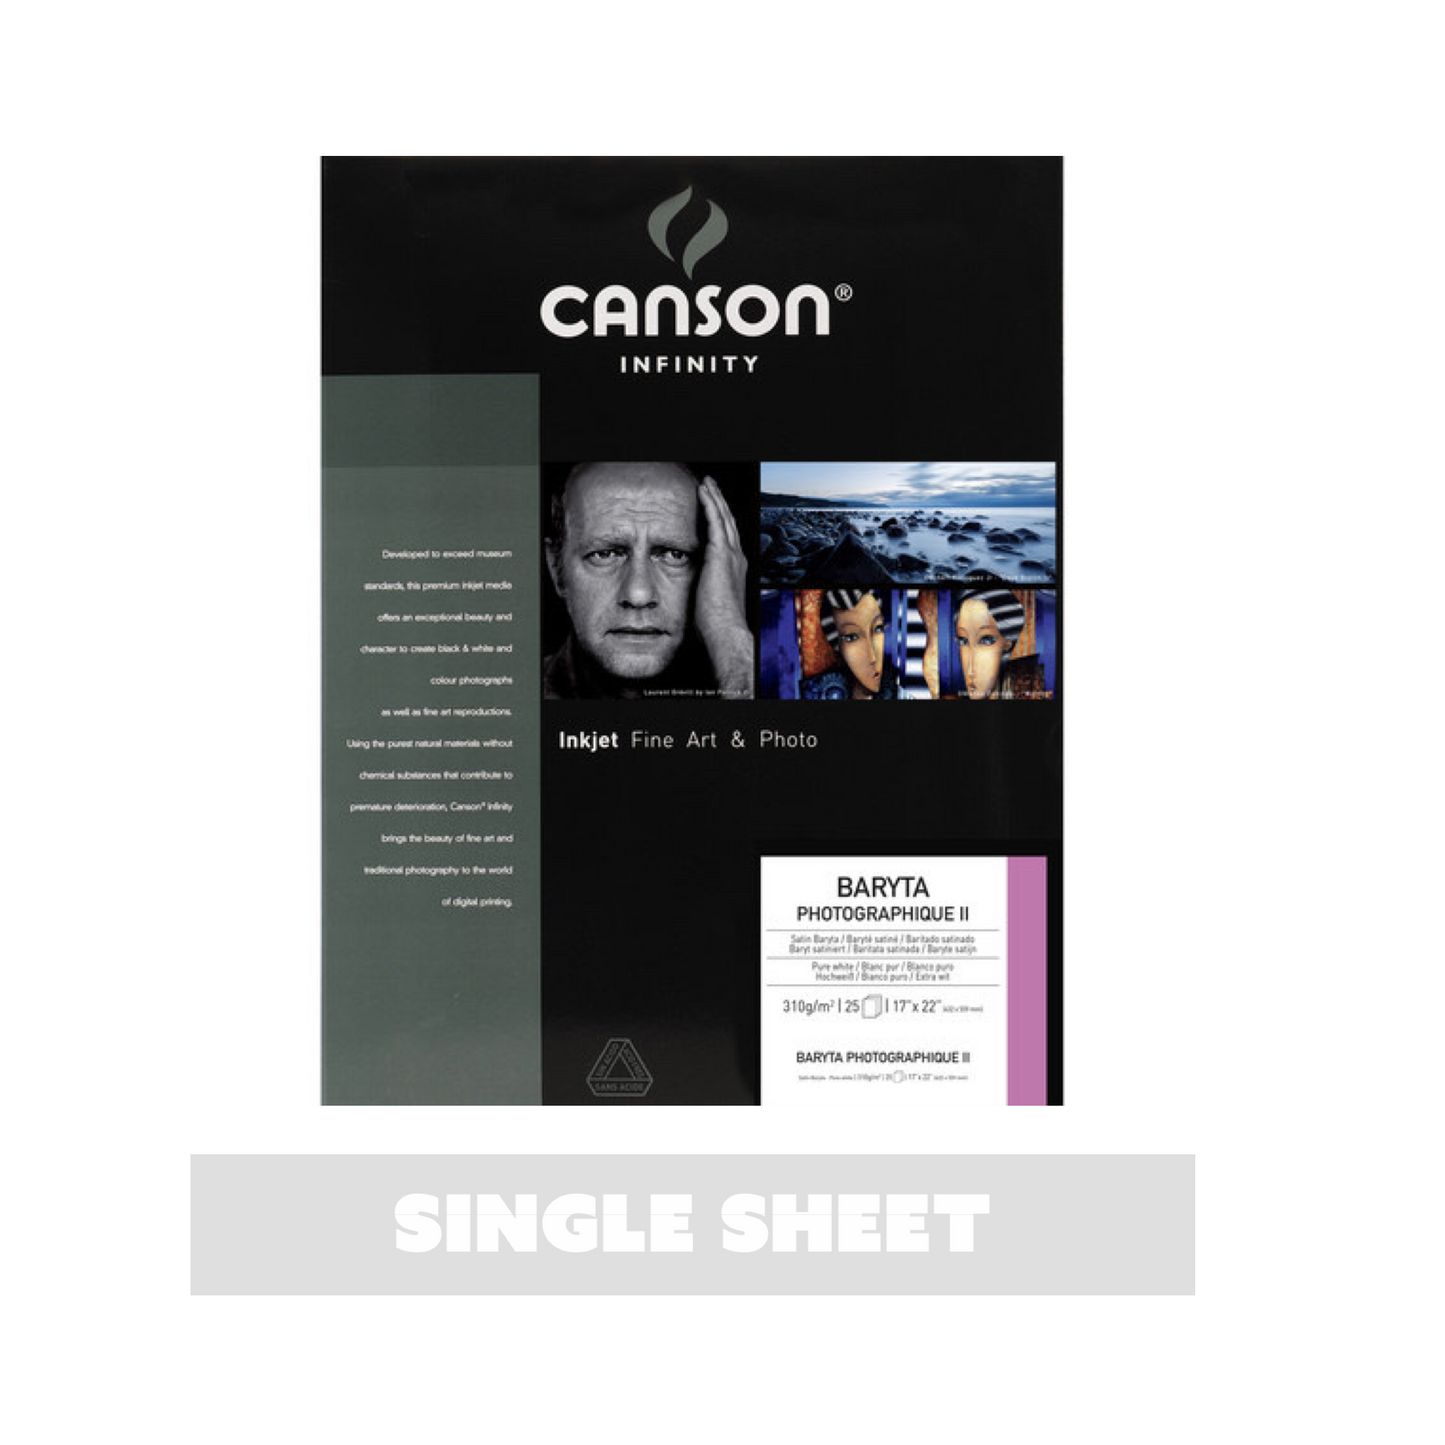 Canson Infinity Baryta Photographique Printer Paper - Single Sheet - 17 x 22 inches by Canson - K. A. Artist Shop